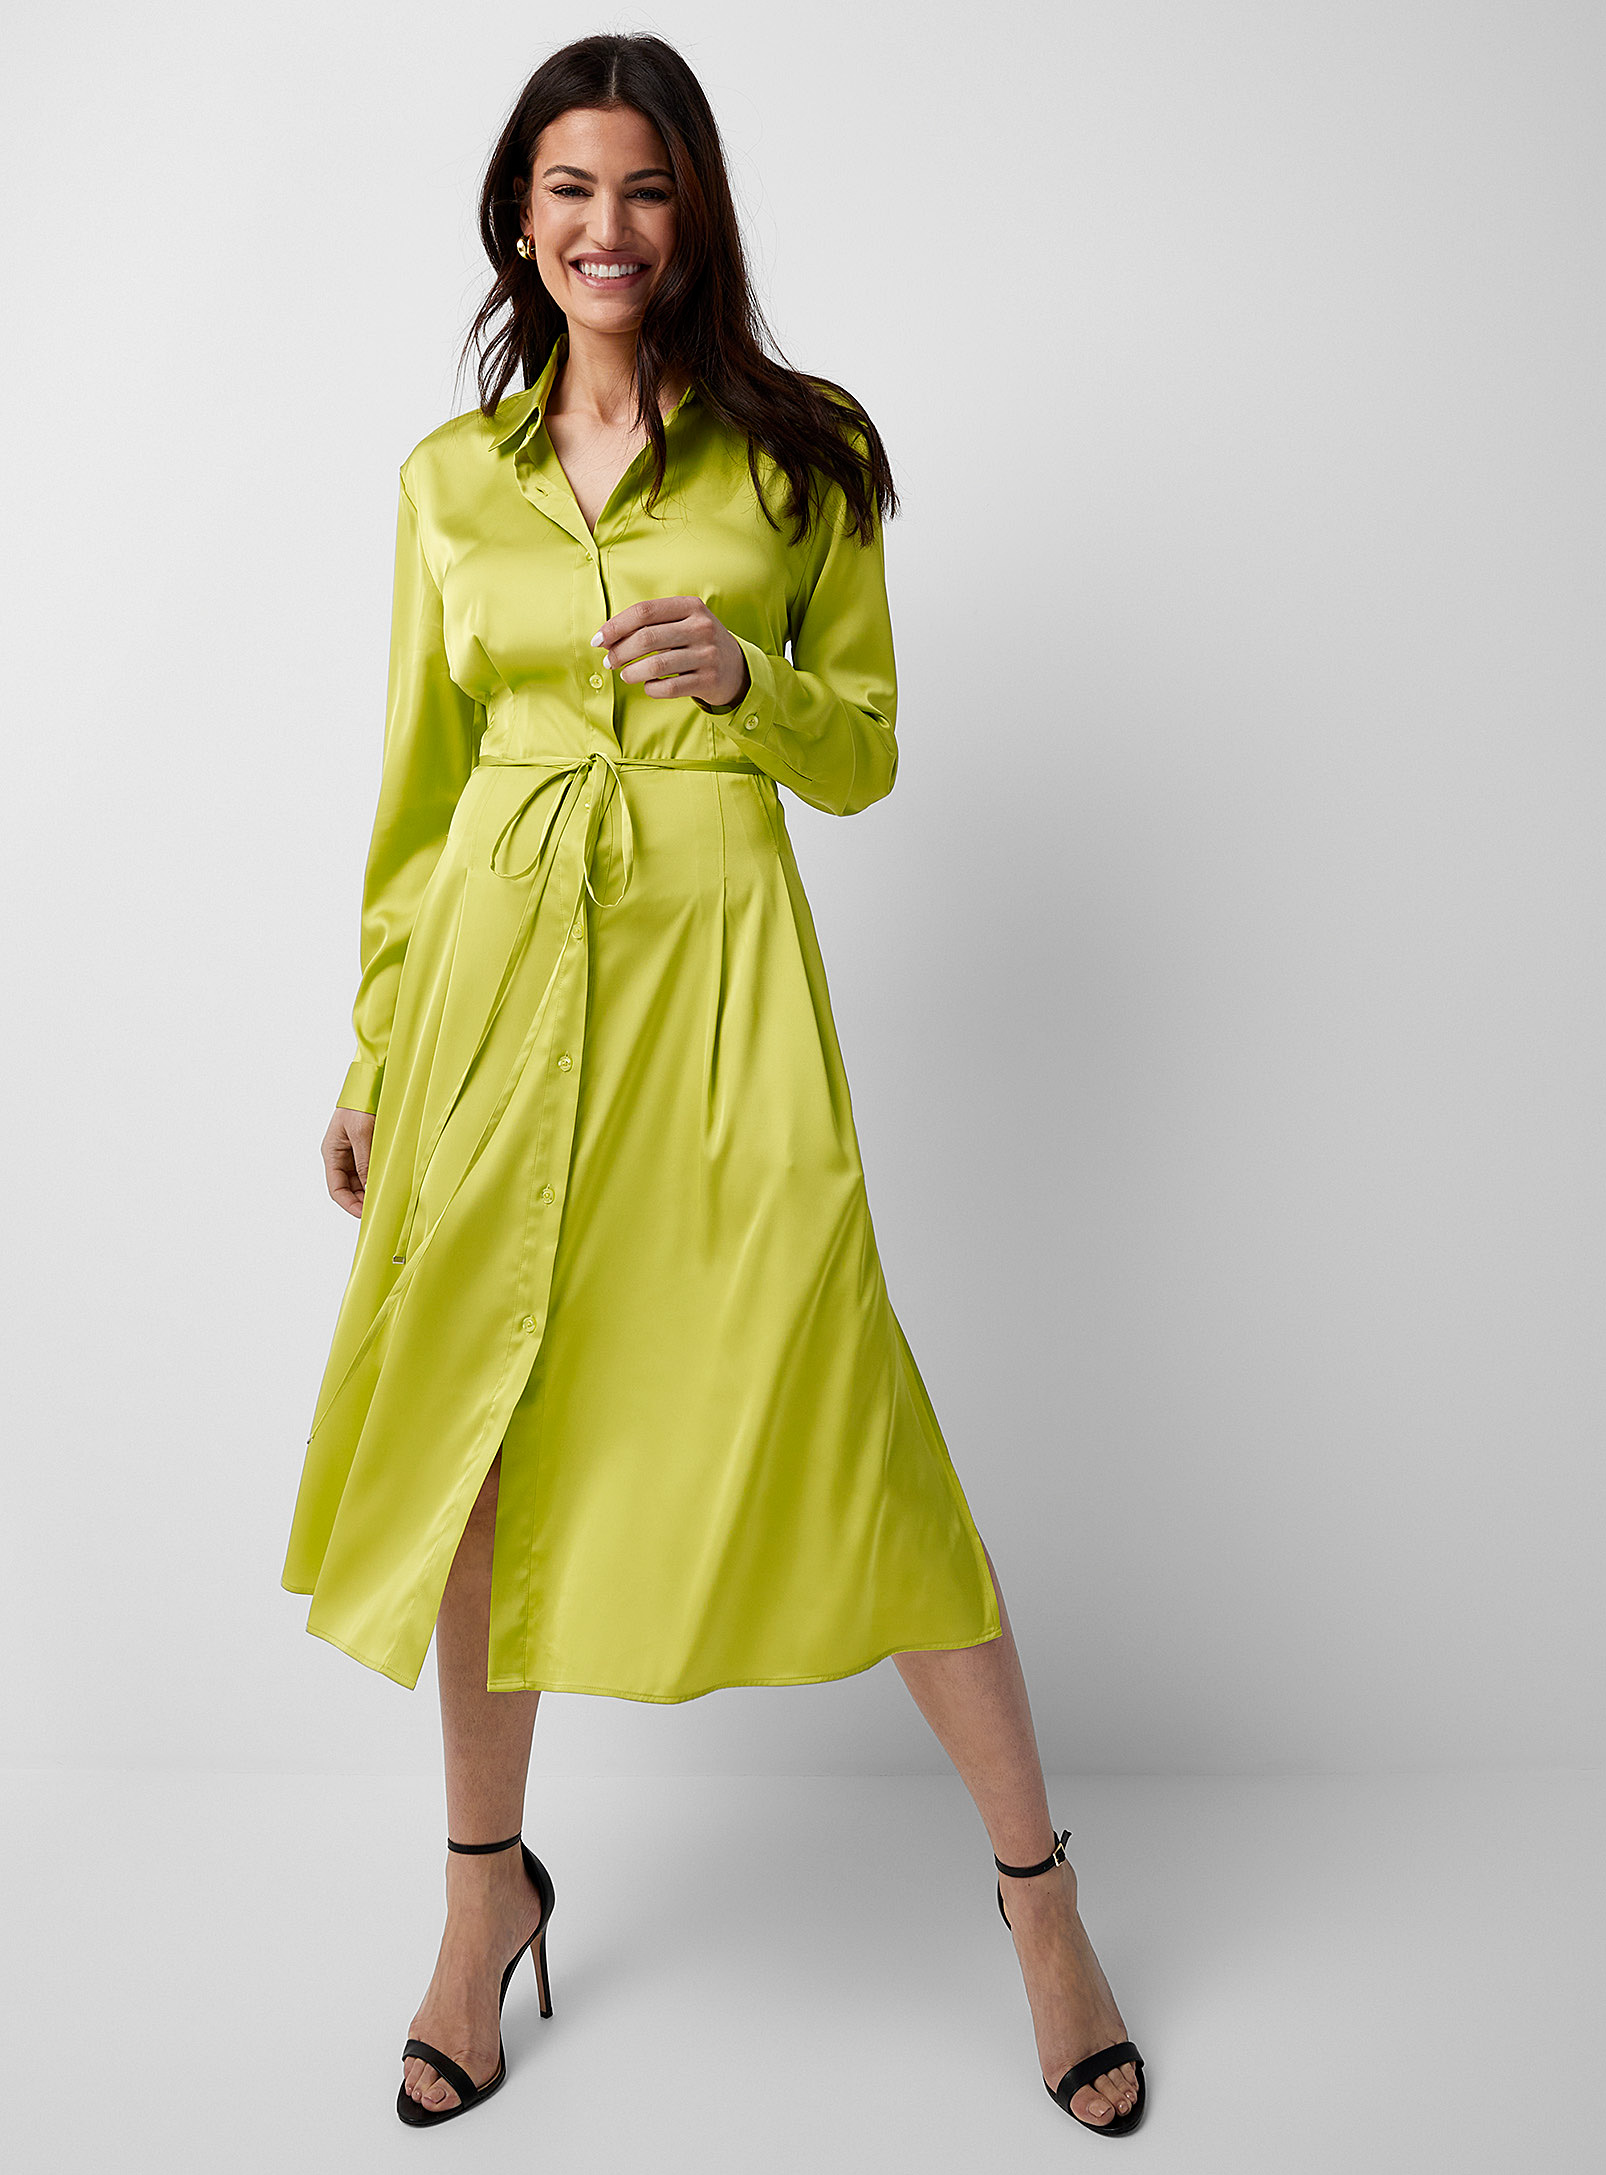 Hugo Boss Chartreuse Silky Shirtdress In Lime Green